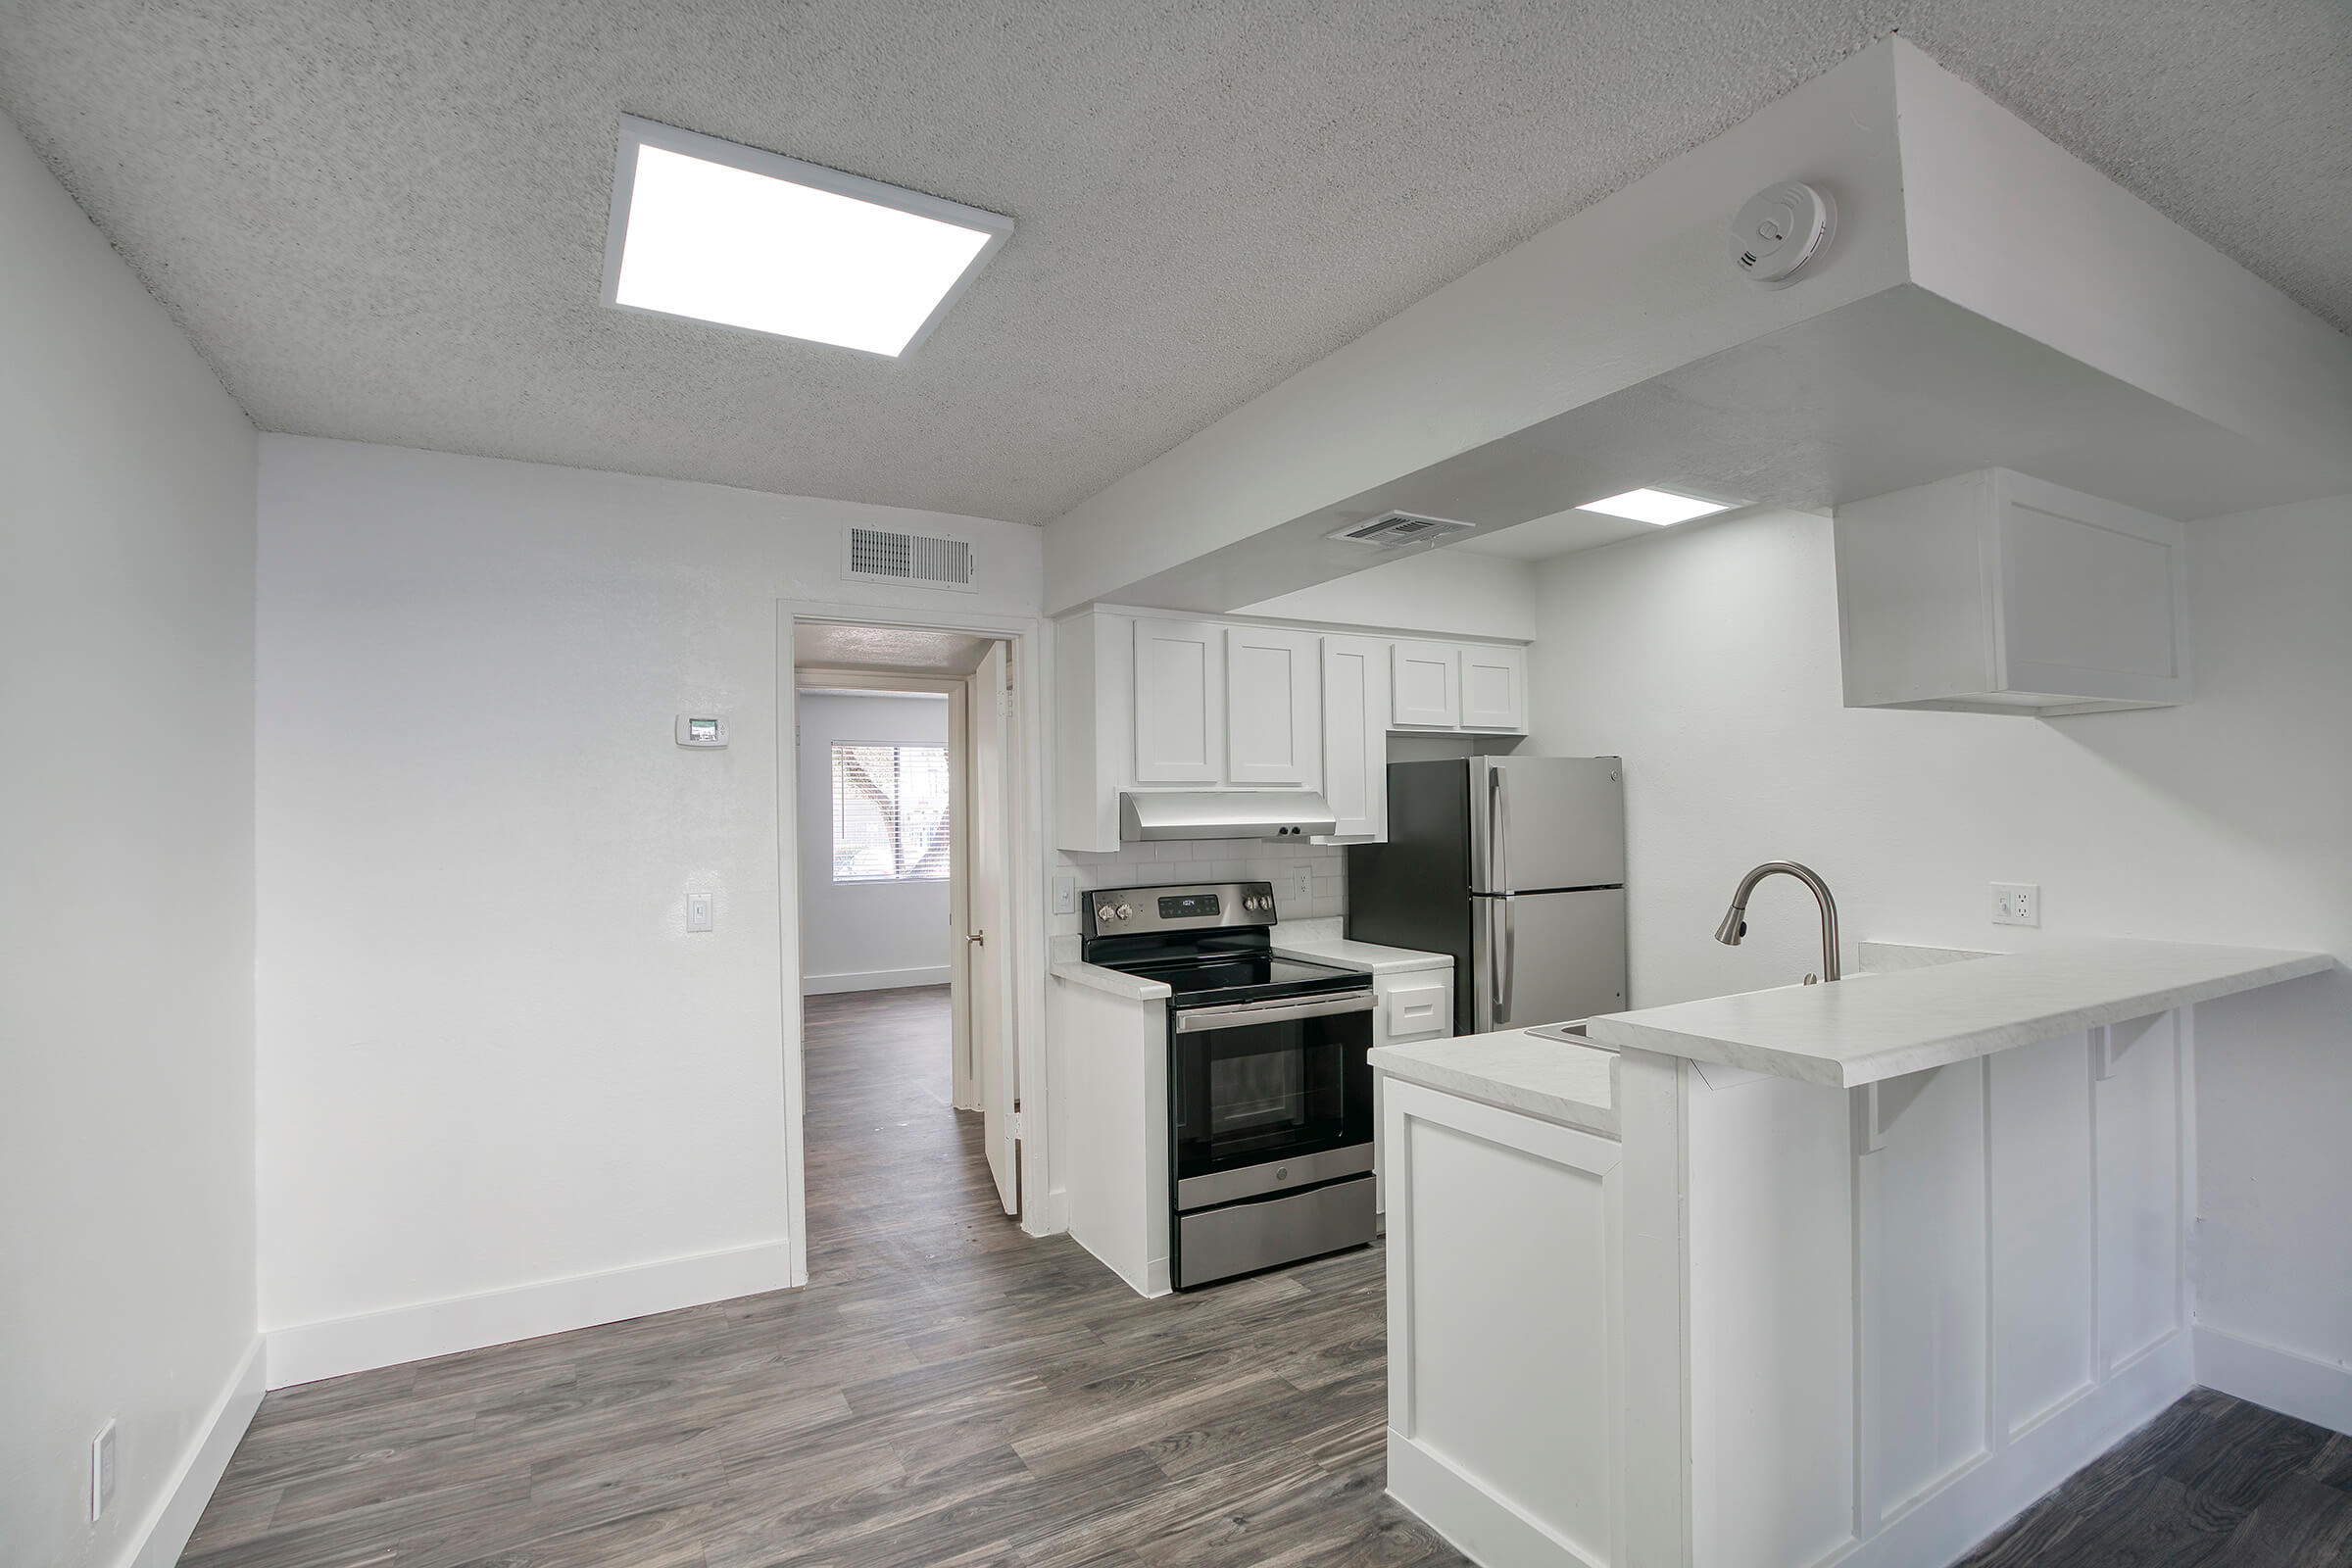 Renovated kitchen with white cabinets, stainless steel appliances, and a walk up kitchen island